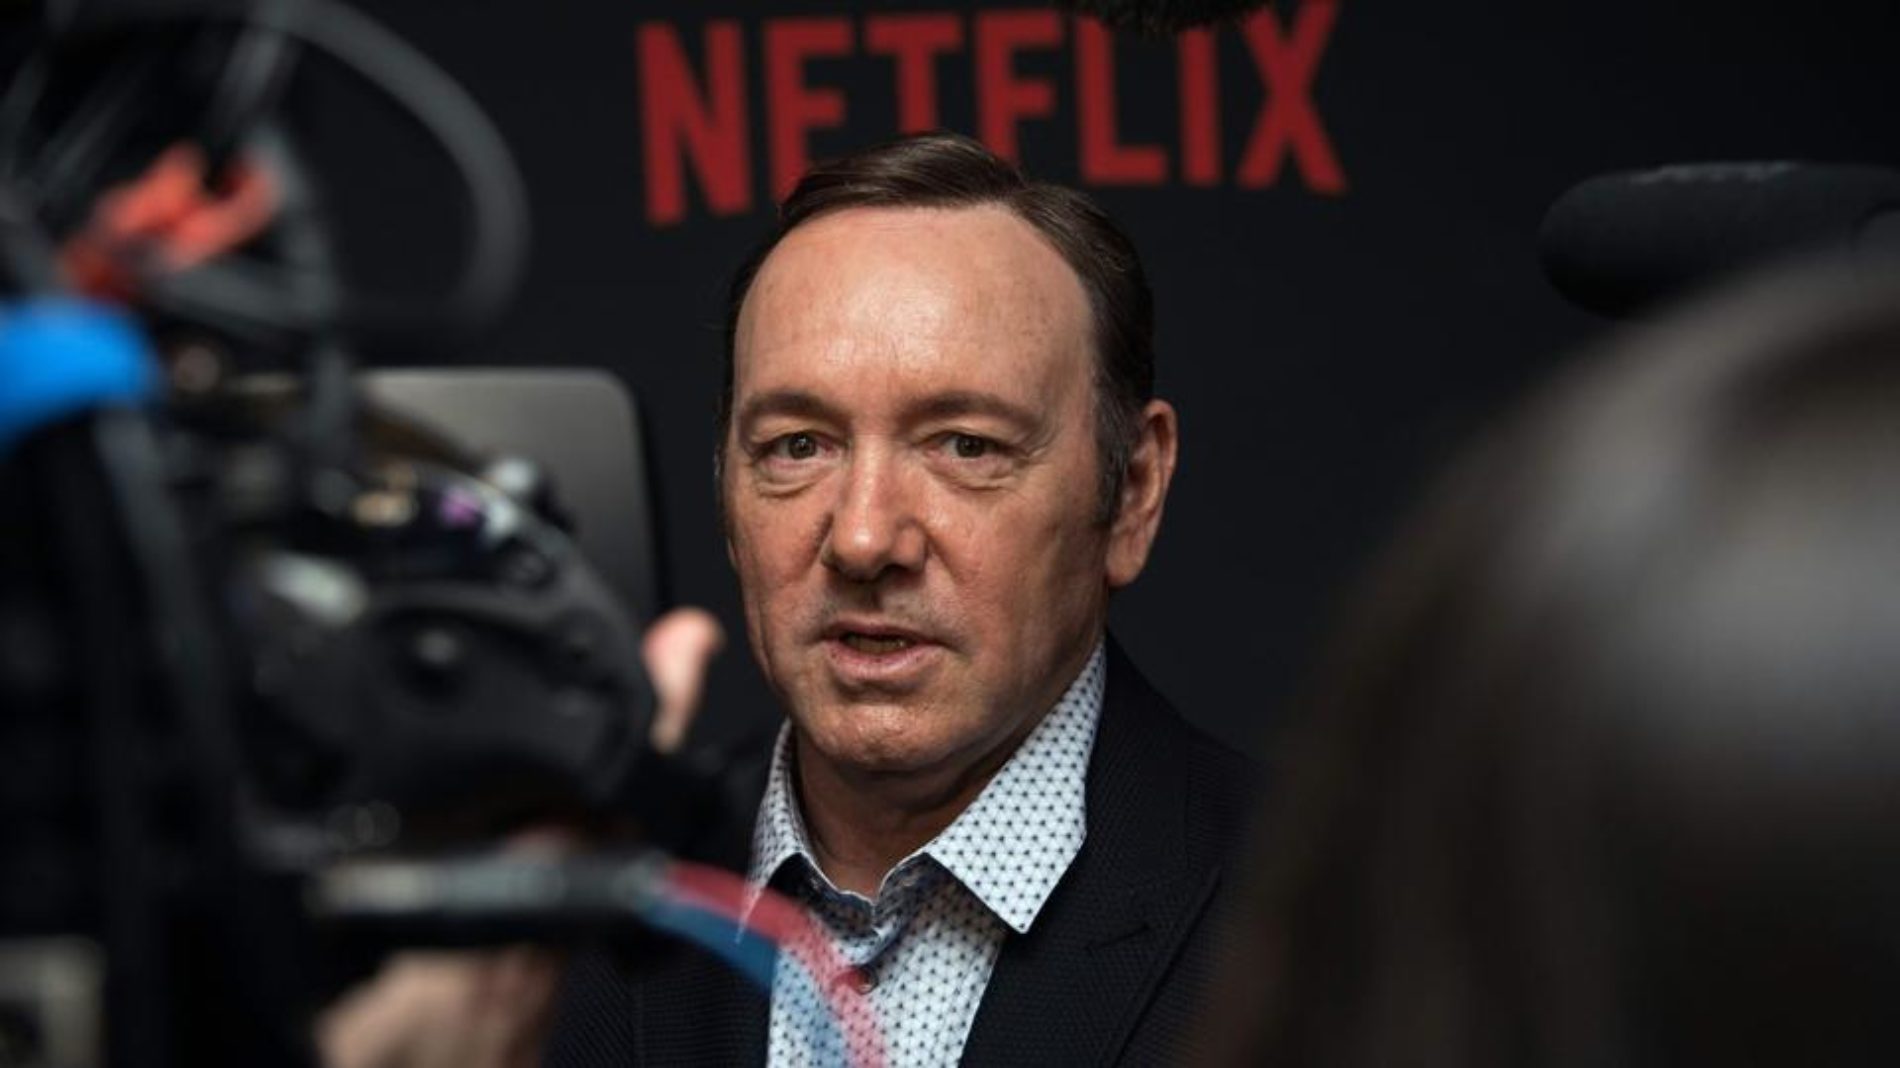 Kevin Spacey gets hit with more sexual misconduct allegations, Netflix suspends House of Cards Season 6 indefinitely